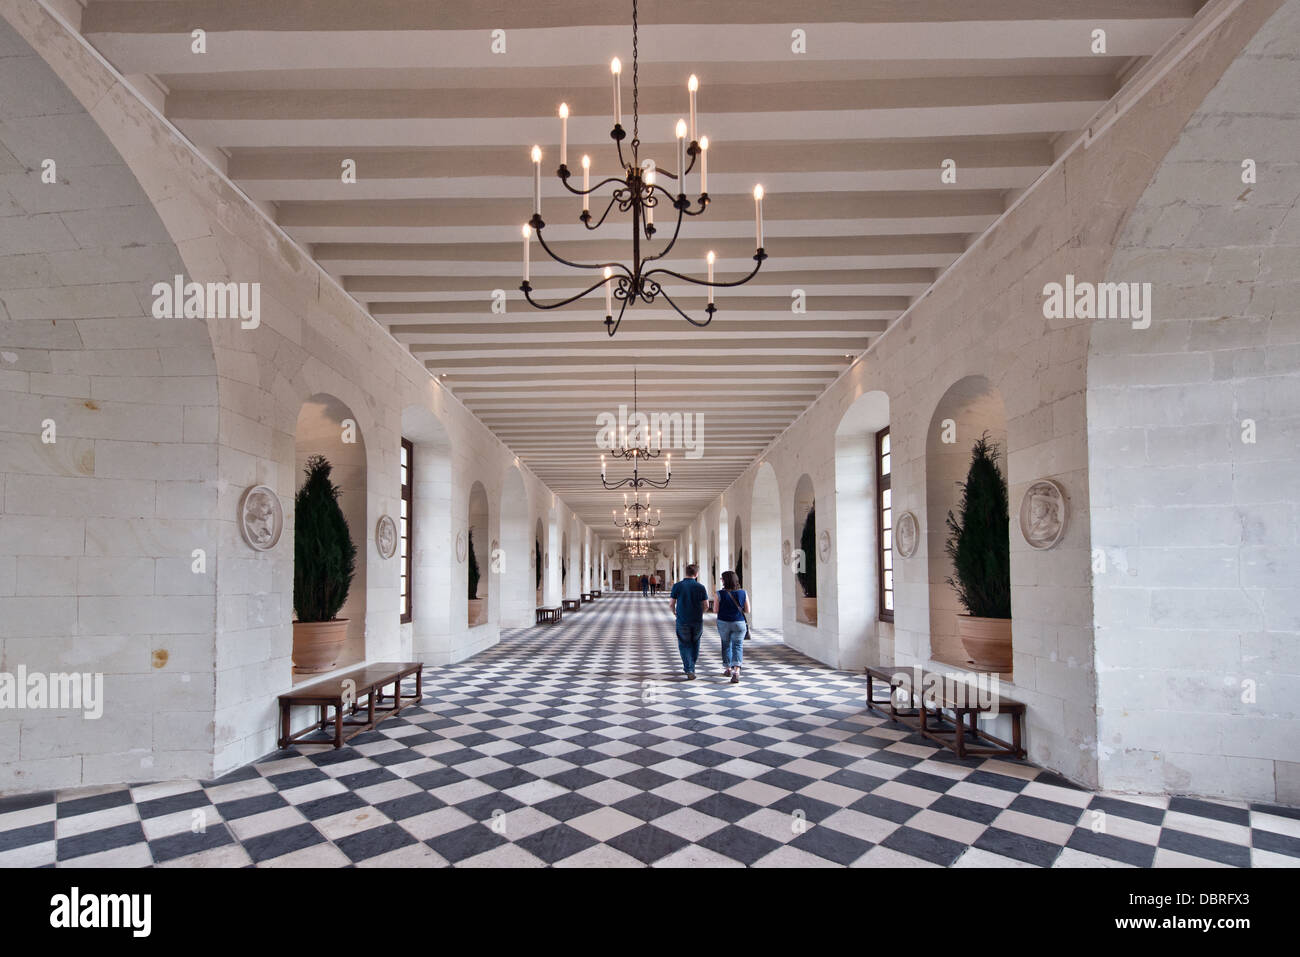 Tourists visiting the Grand hall at Château Chenonceau in the Loire Valley, France Stock Photo